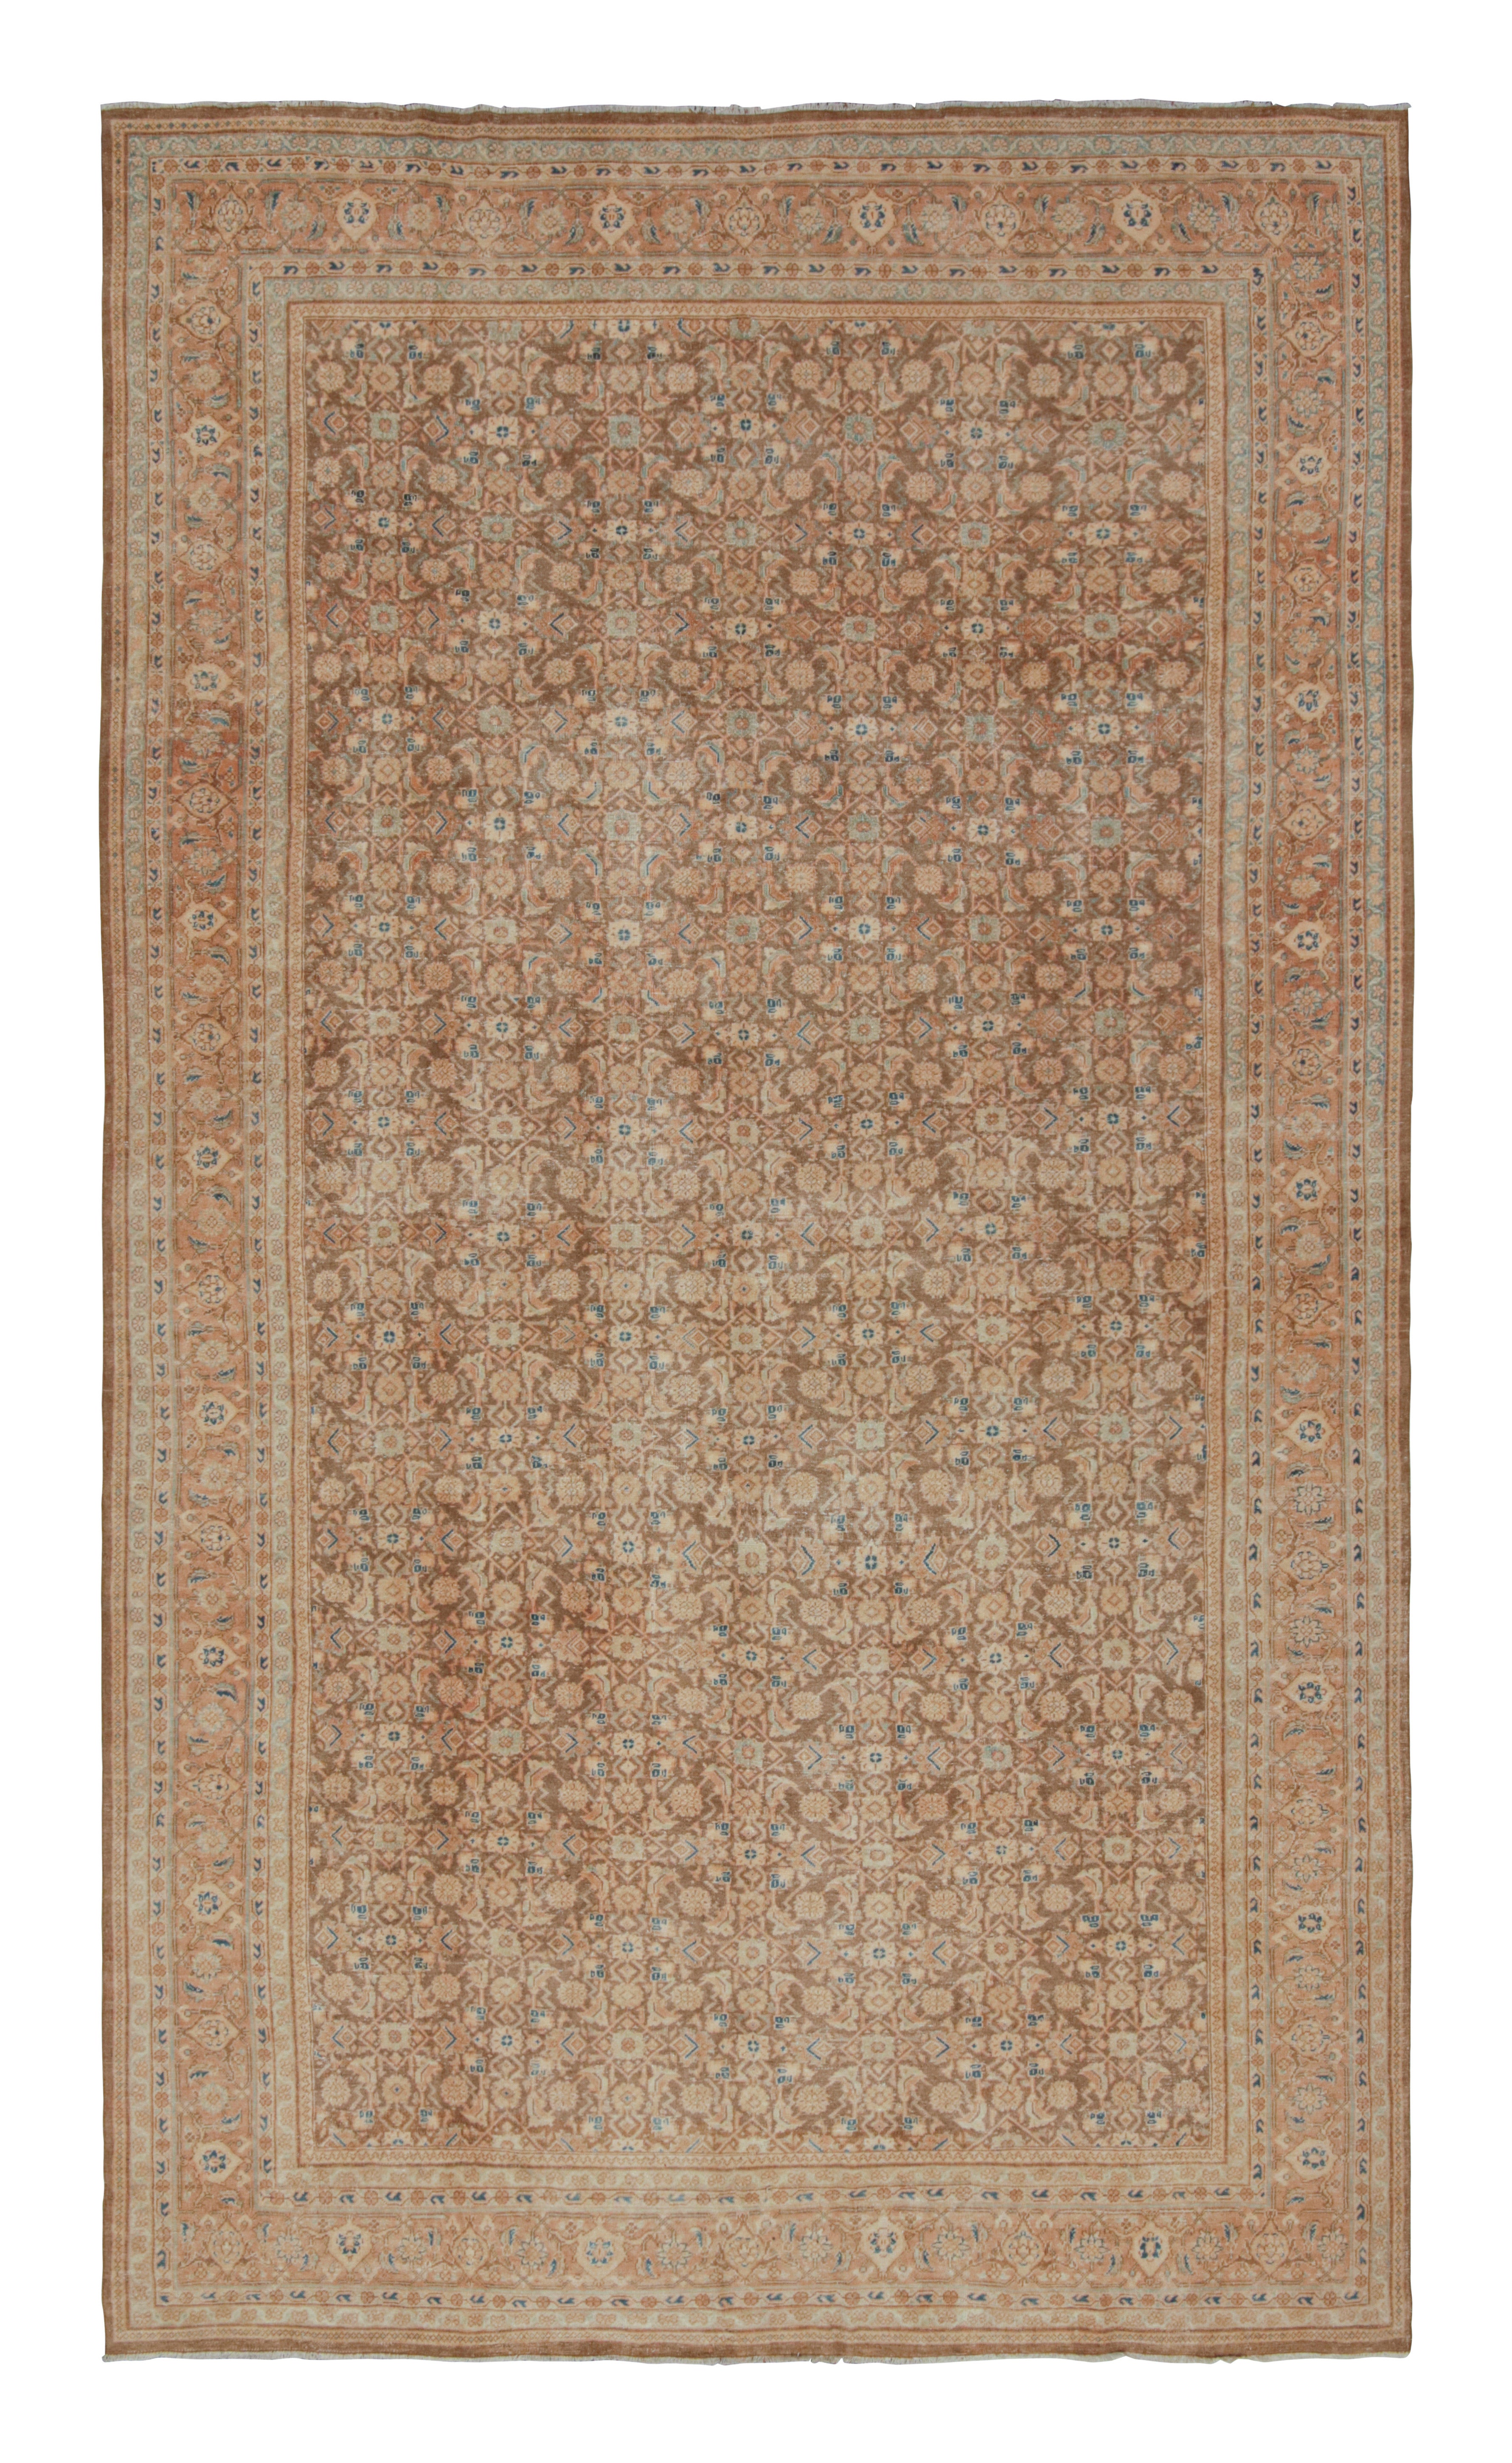 Vintage Persian Tabriz Rug in Brown, with Herati Patterns, from Rug & Kilim